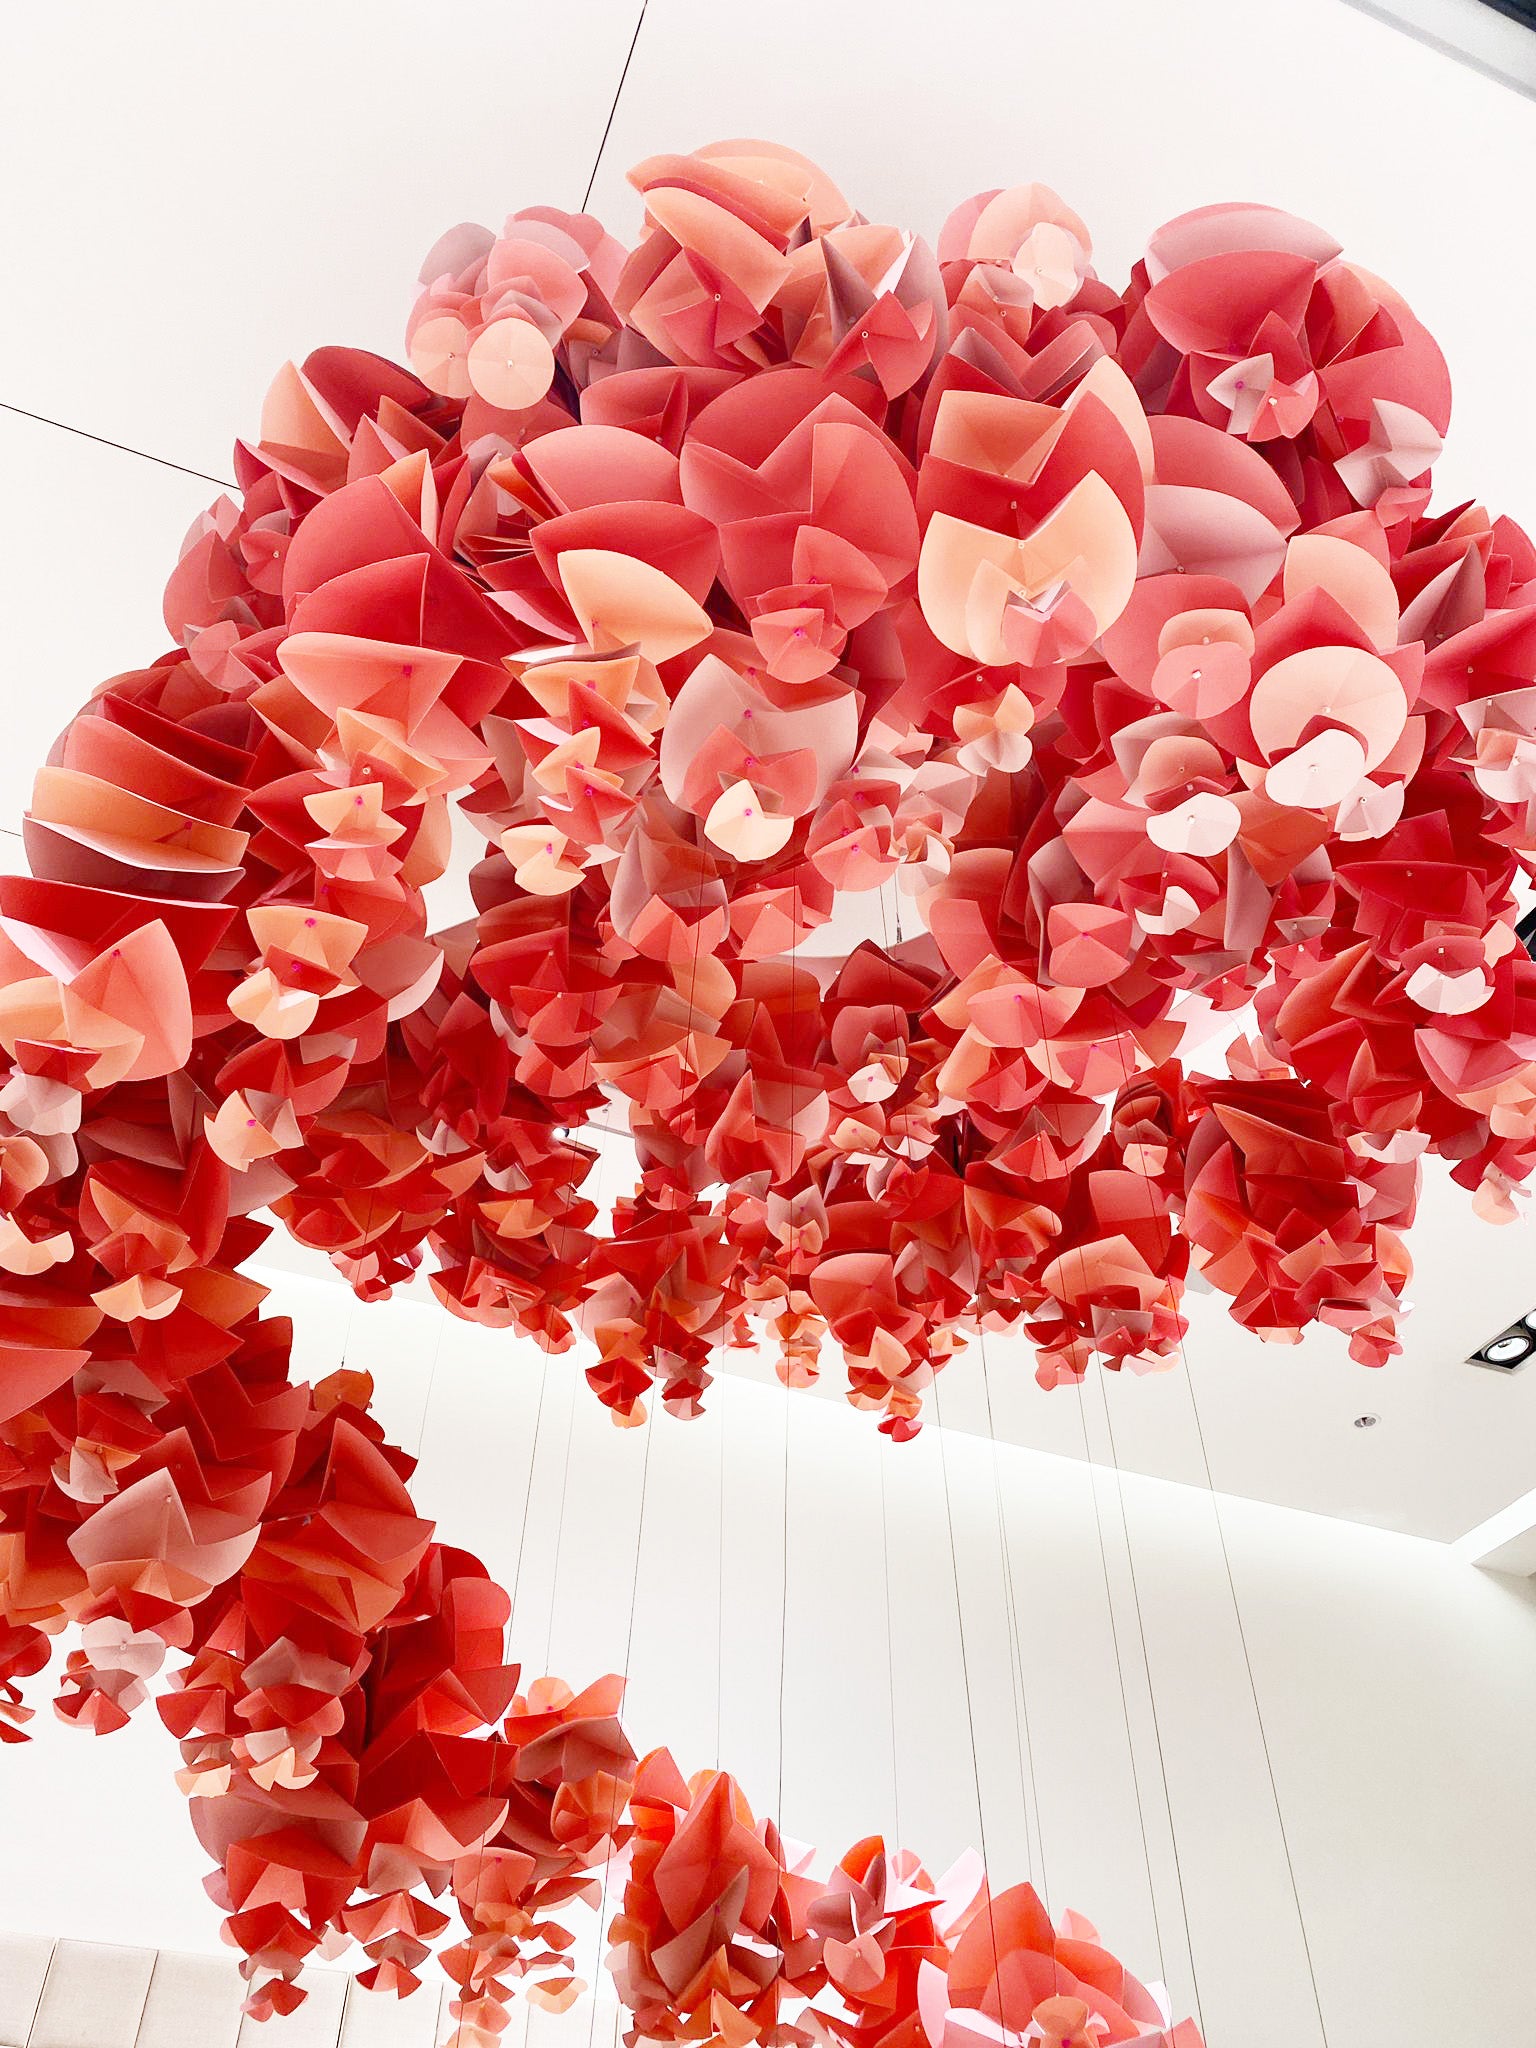 A large, pink, spiral-shaped papercraft petal installation hangs from the ceiling of a brightly lit retail store.